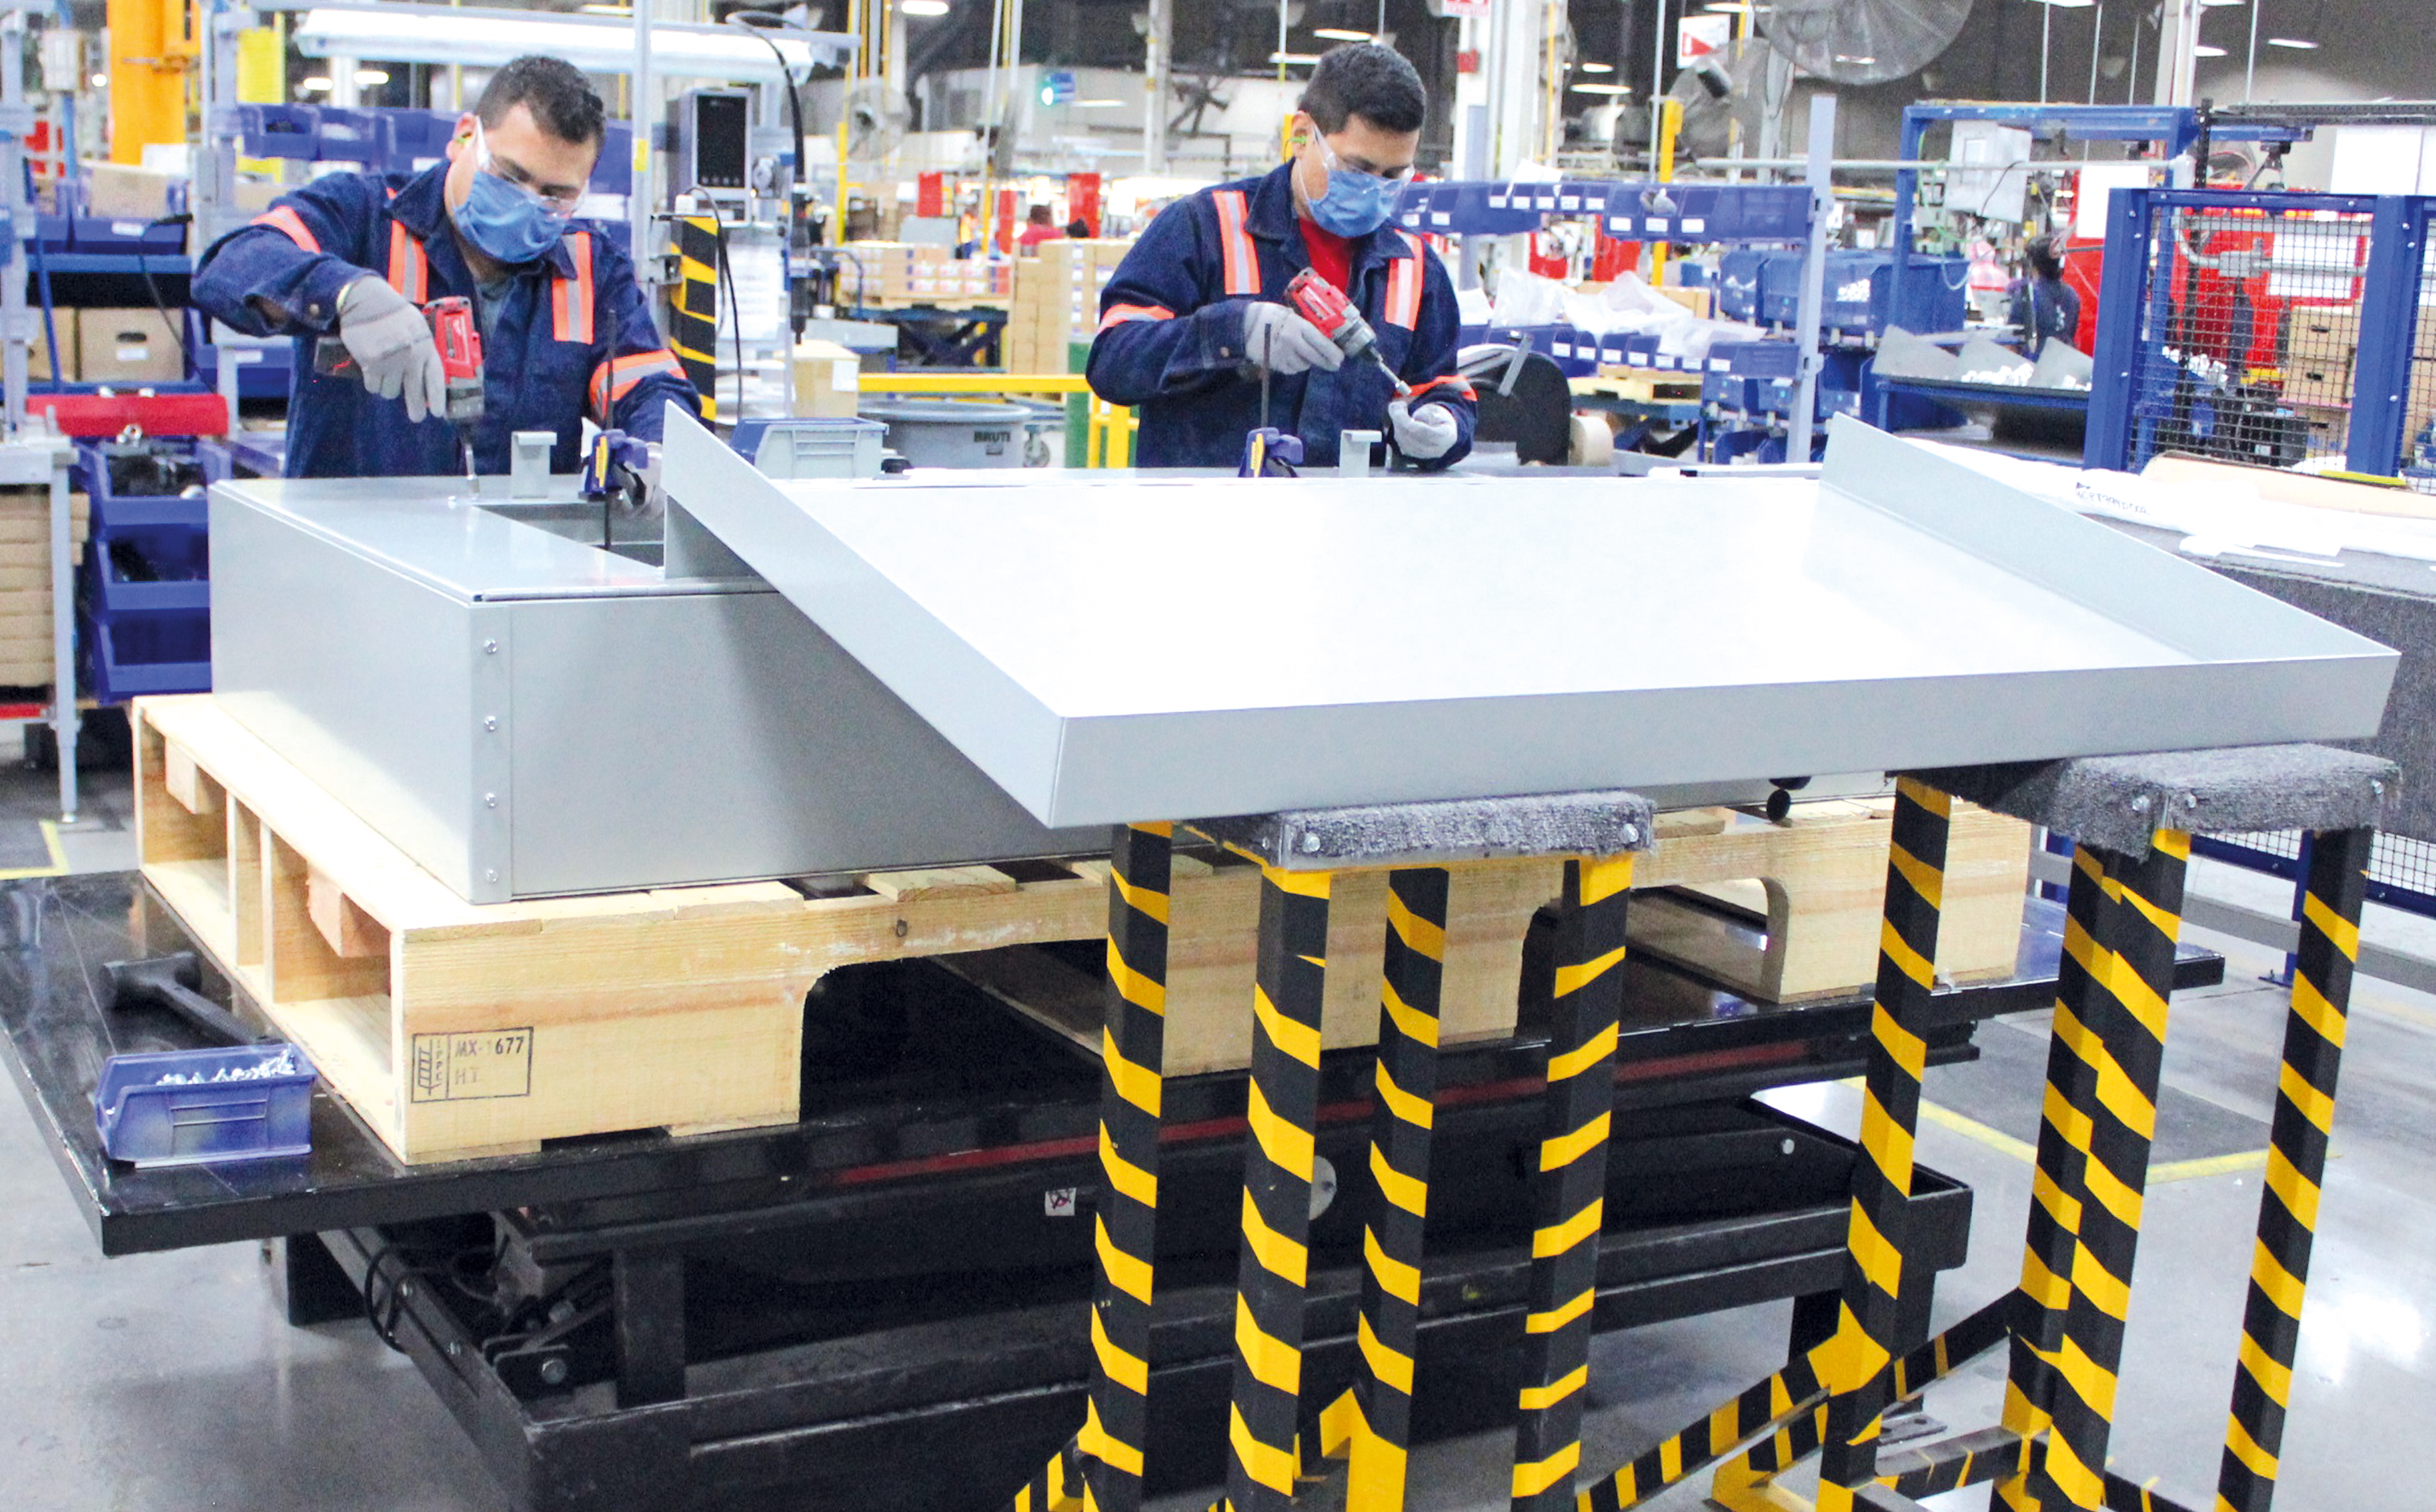 Manufacturing boosts the industrial real estate market